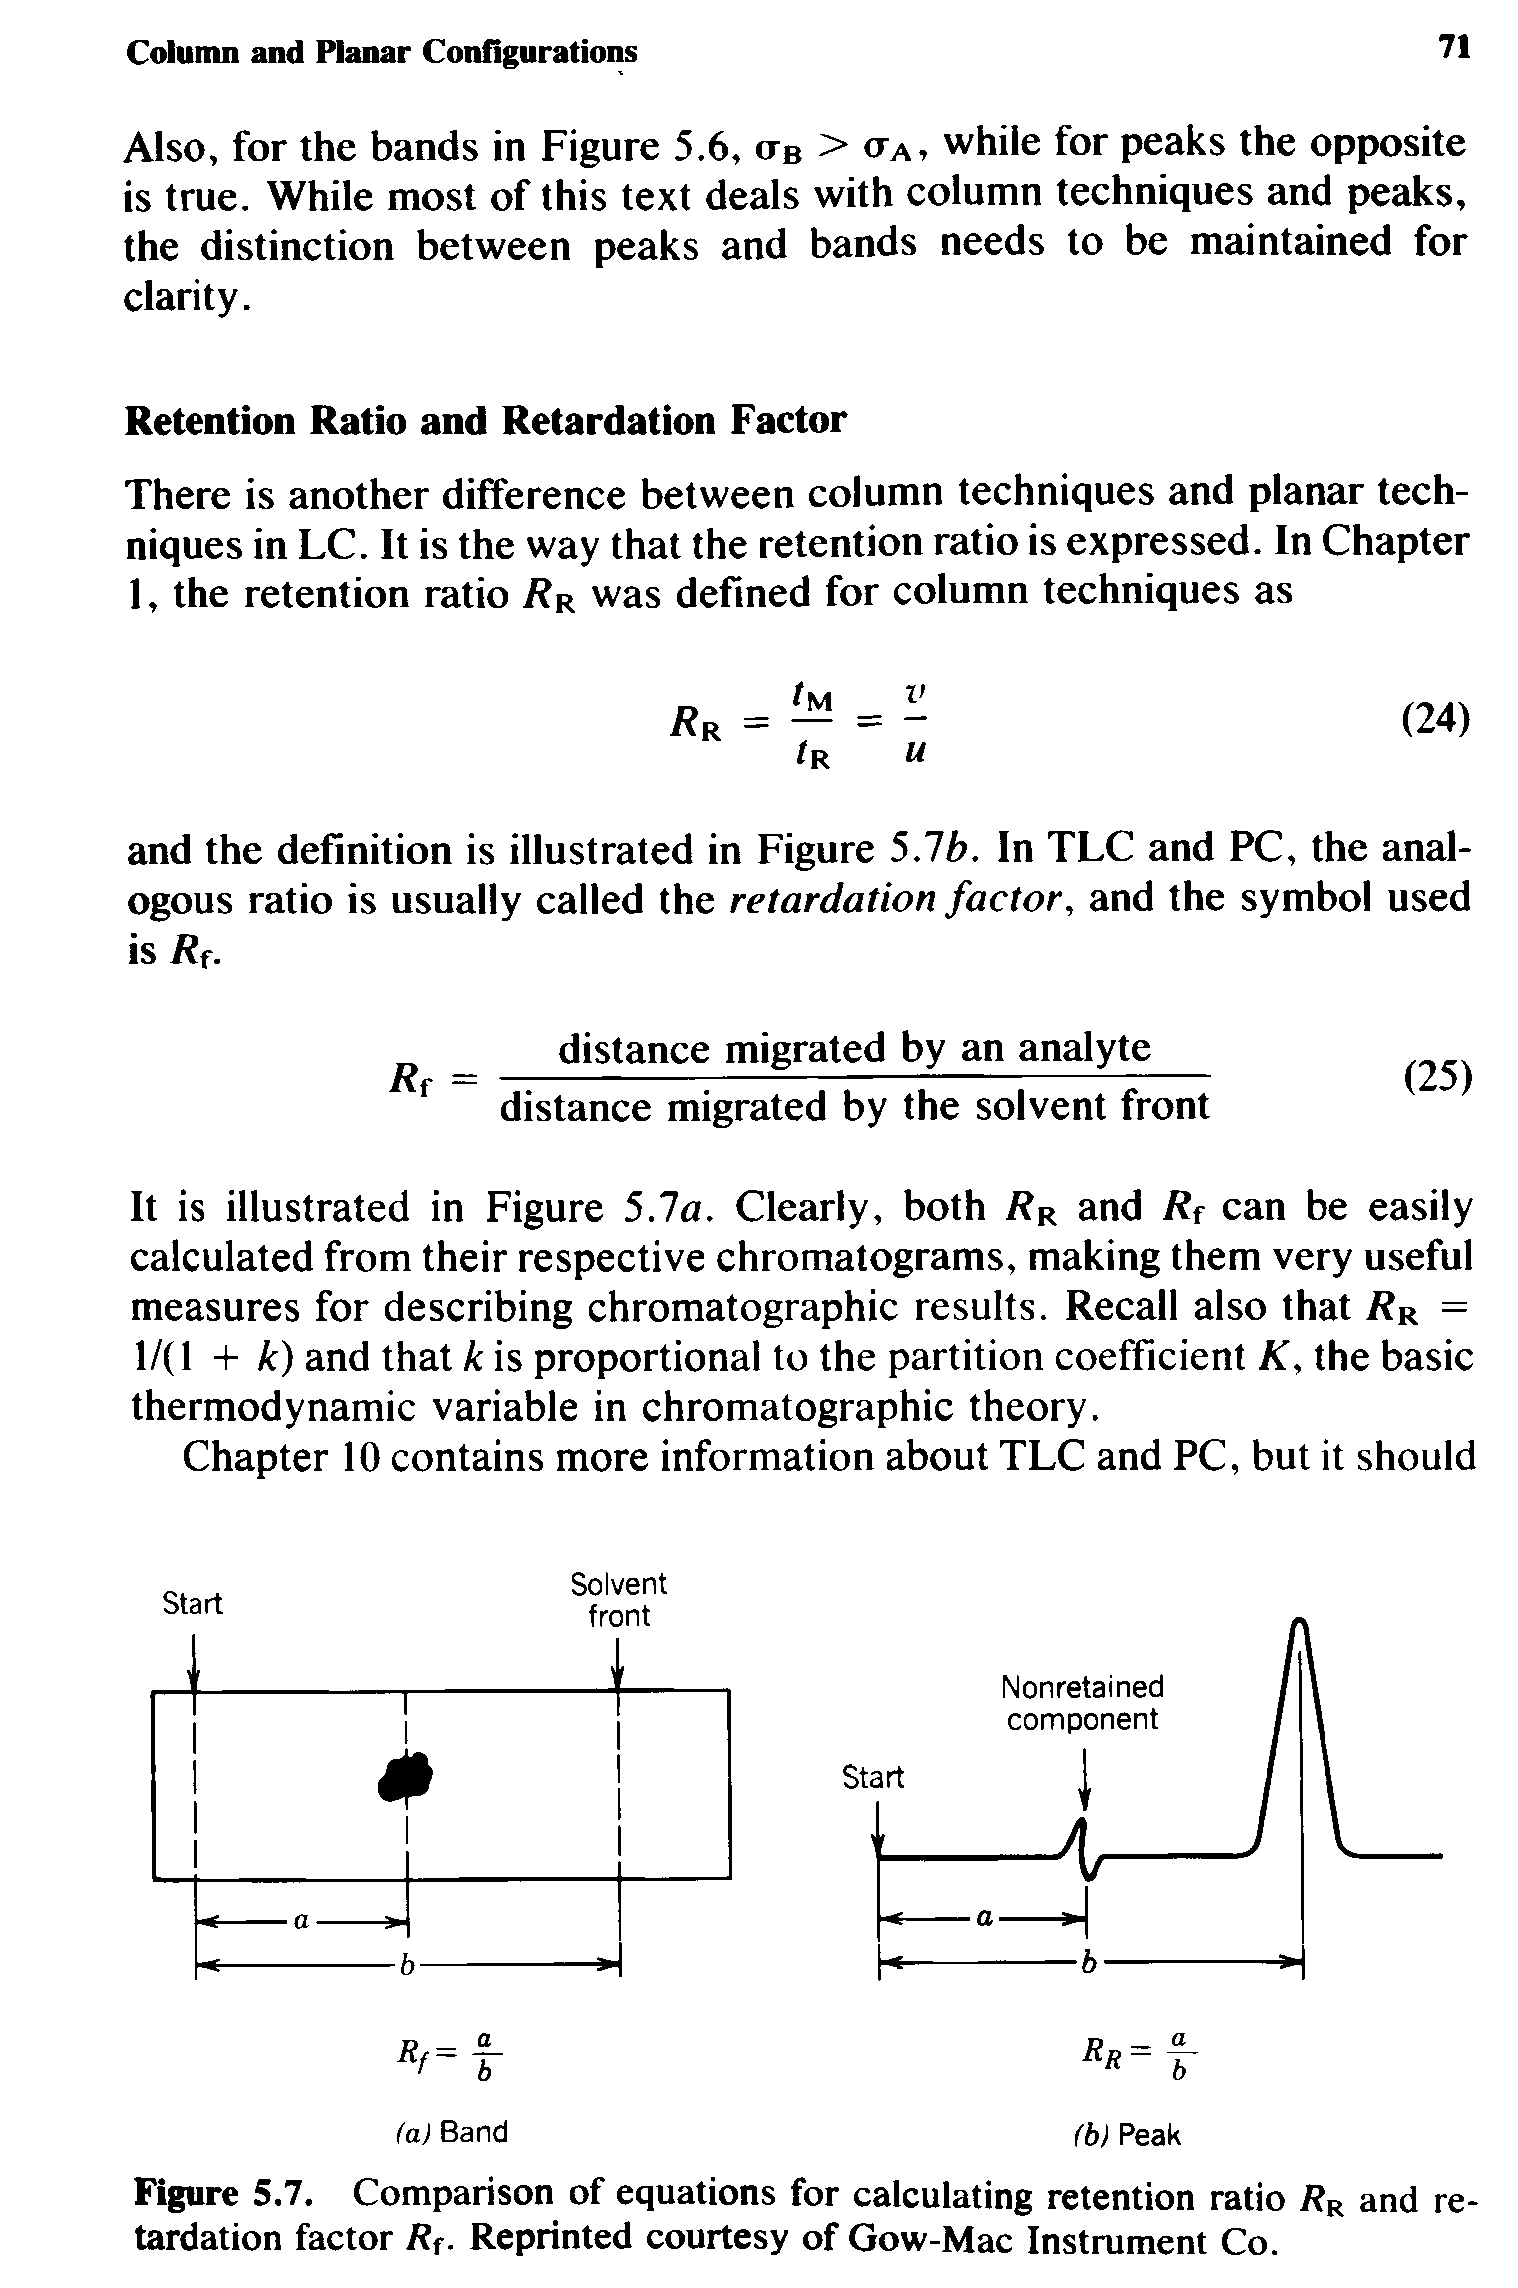 Figure 5.7. Comparison of equations for calculating retention ratio Rr and retardation factor Rf. Reprinted courtesy of Gow-Mac Instrument Co.